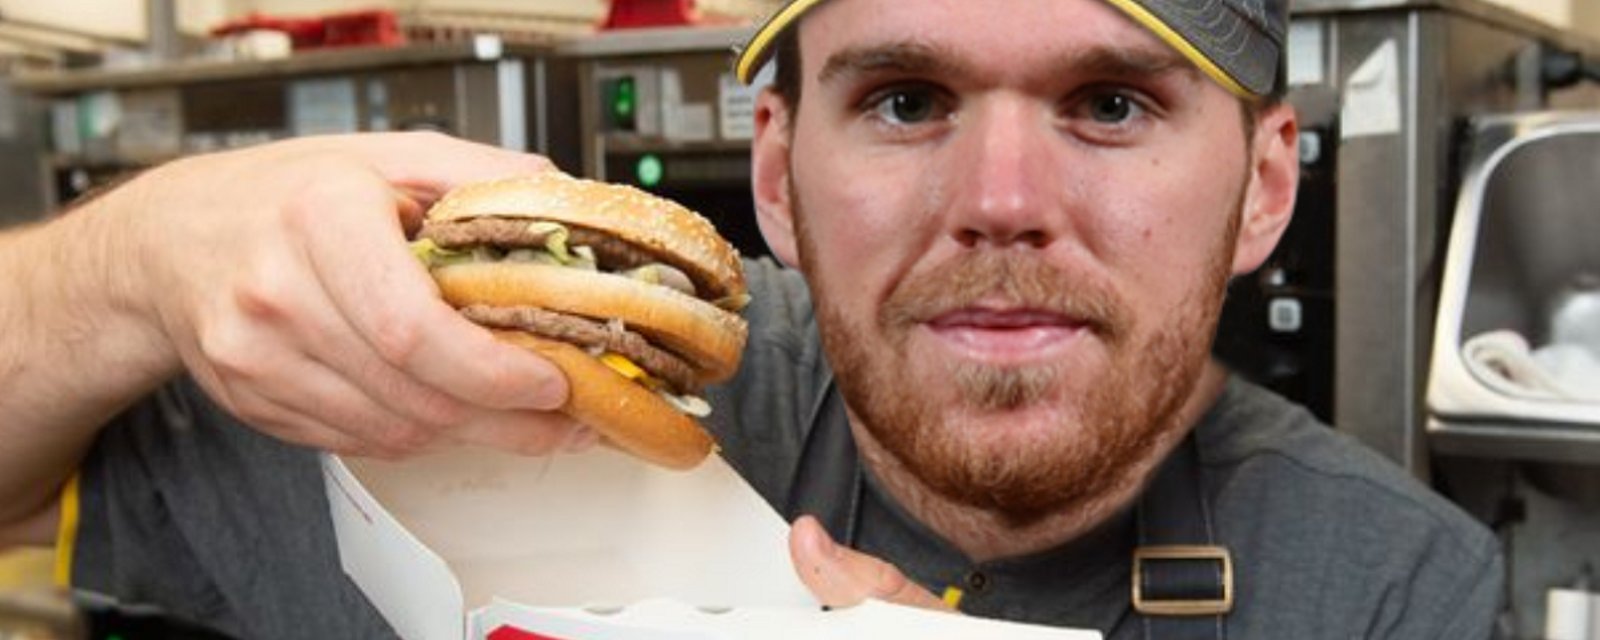 McDonald's makes McDavid a once in a lifetime offer.